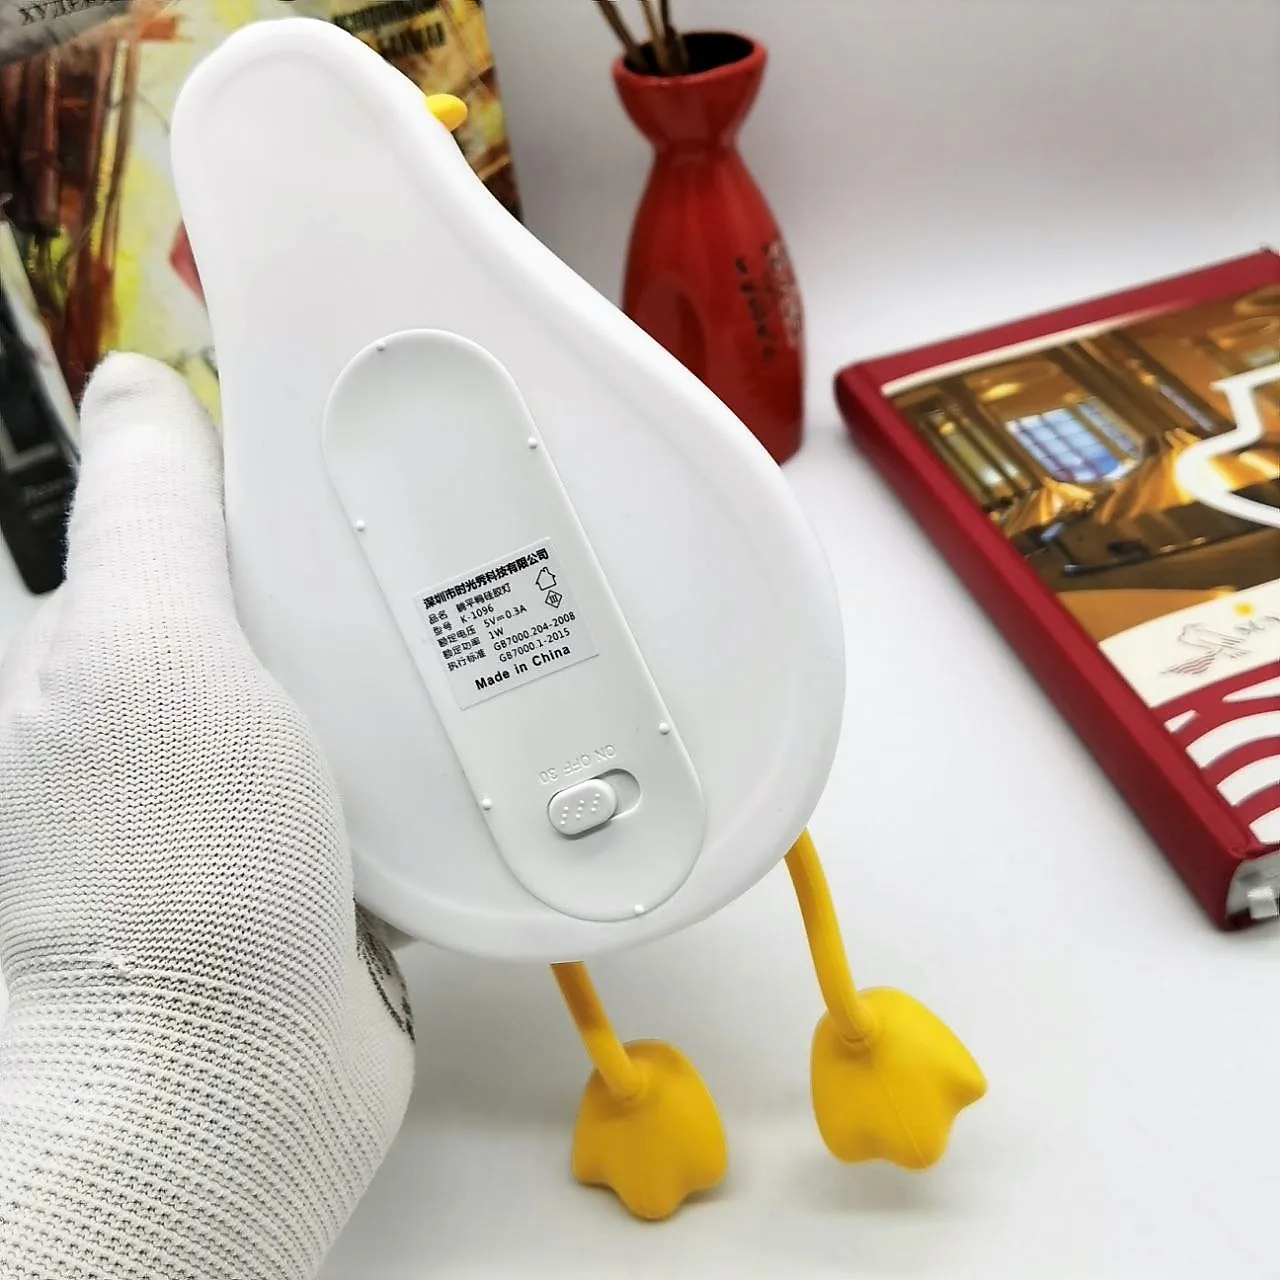 2022 LED Lying Flat Duck Silicone Night Light USB Charging Bedside with Sleep Night Light Pat Dimming Atmosphere Table Lamp Gift photo review